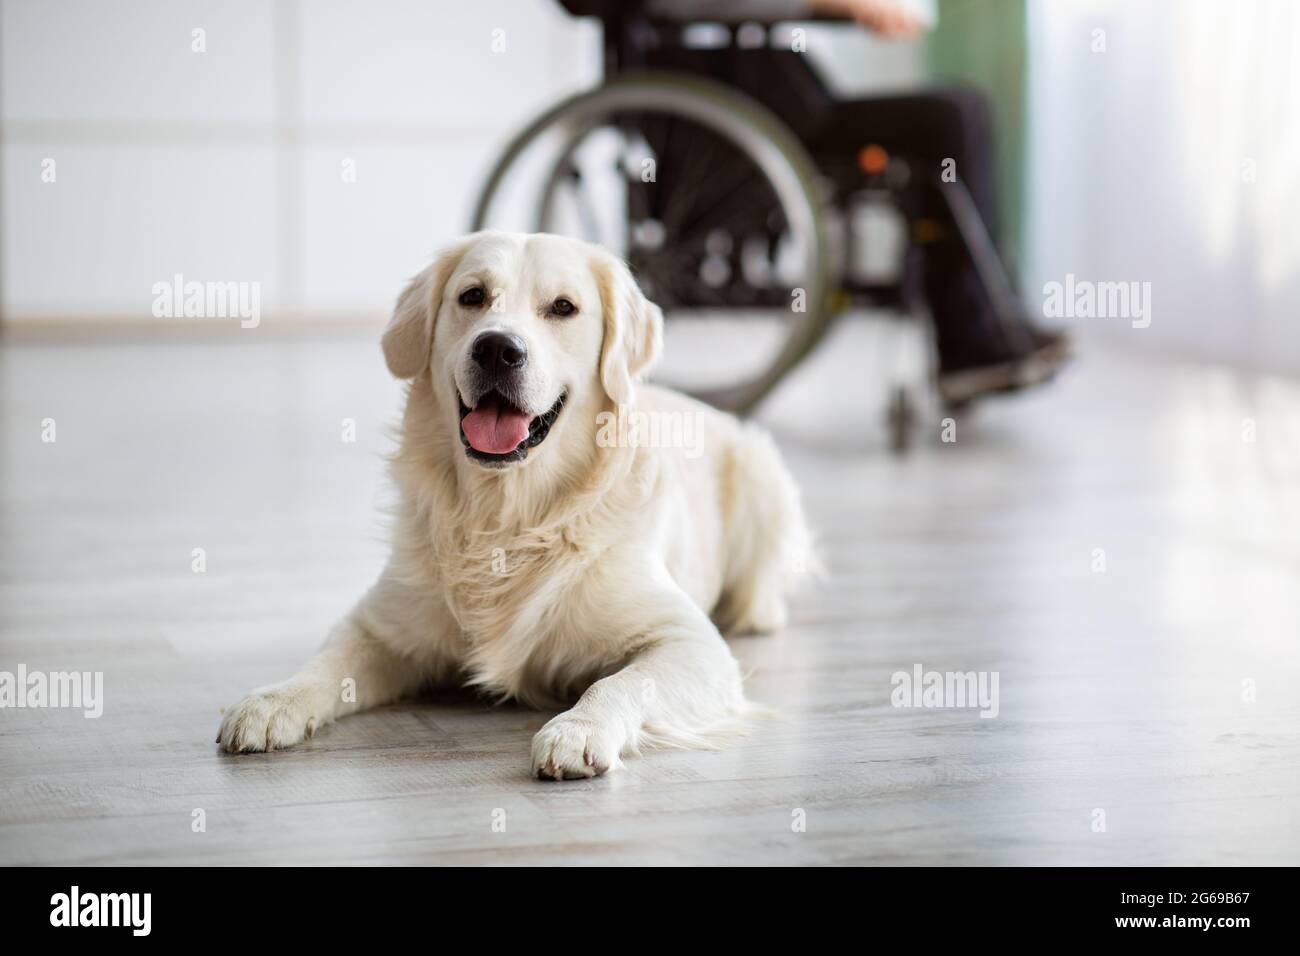 Cute golden retriever dog lying on floor indoors, disabled teen boy in wheelchair at background, selective focus Stock Photo